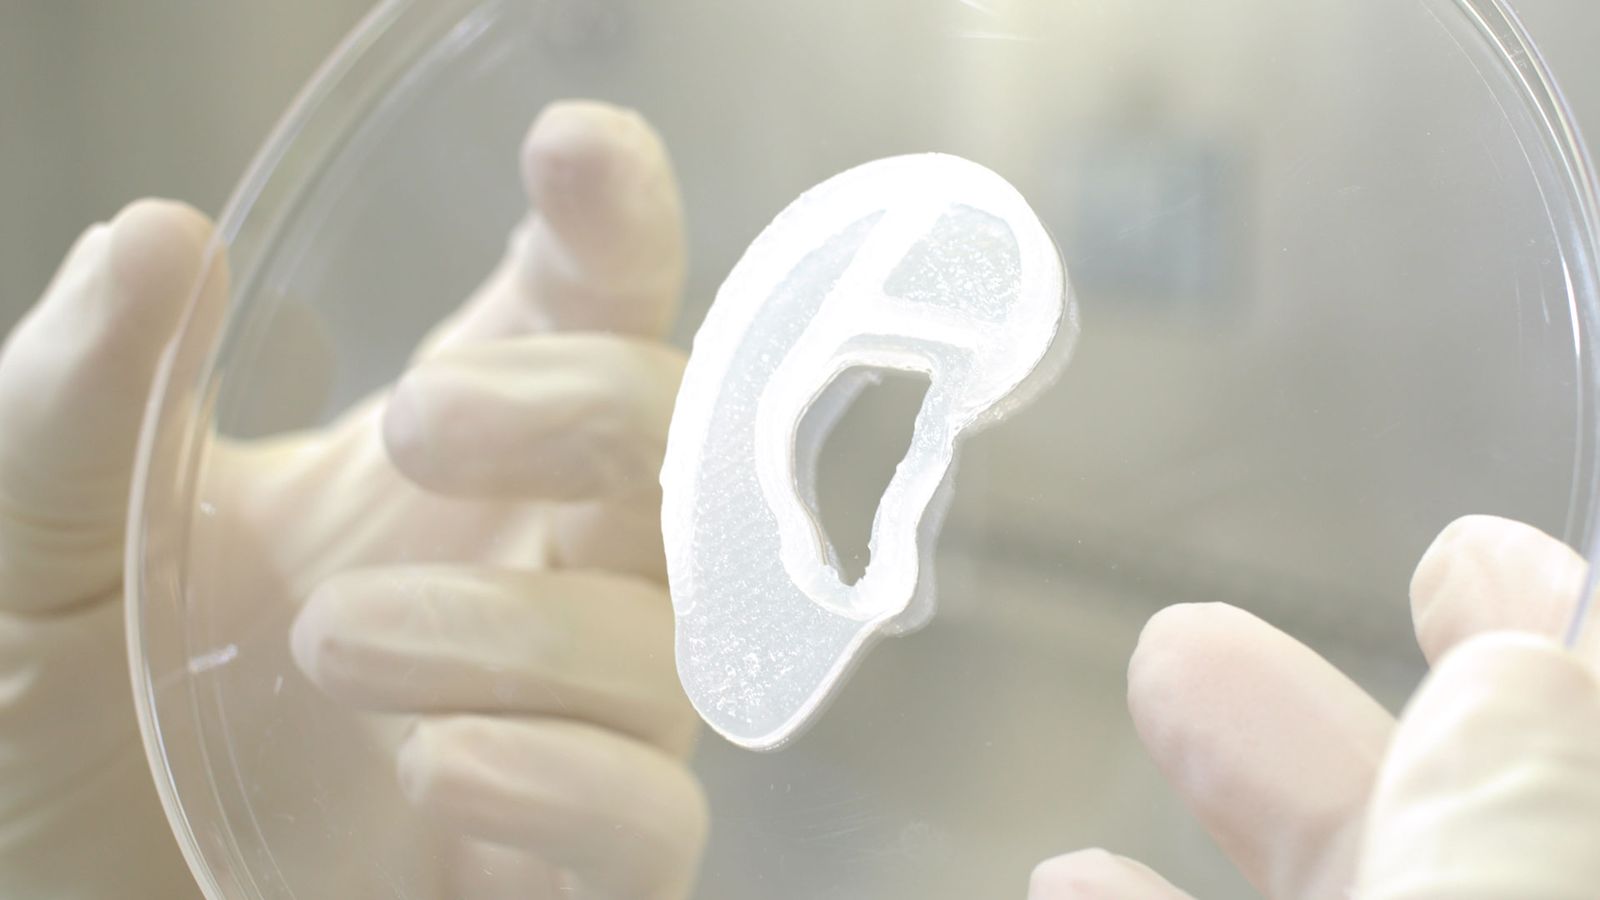 Surgeons Transplant 3-D-Printed Ear Made From Patient’s Own Cells